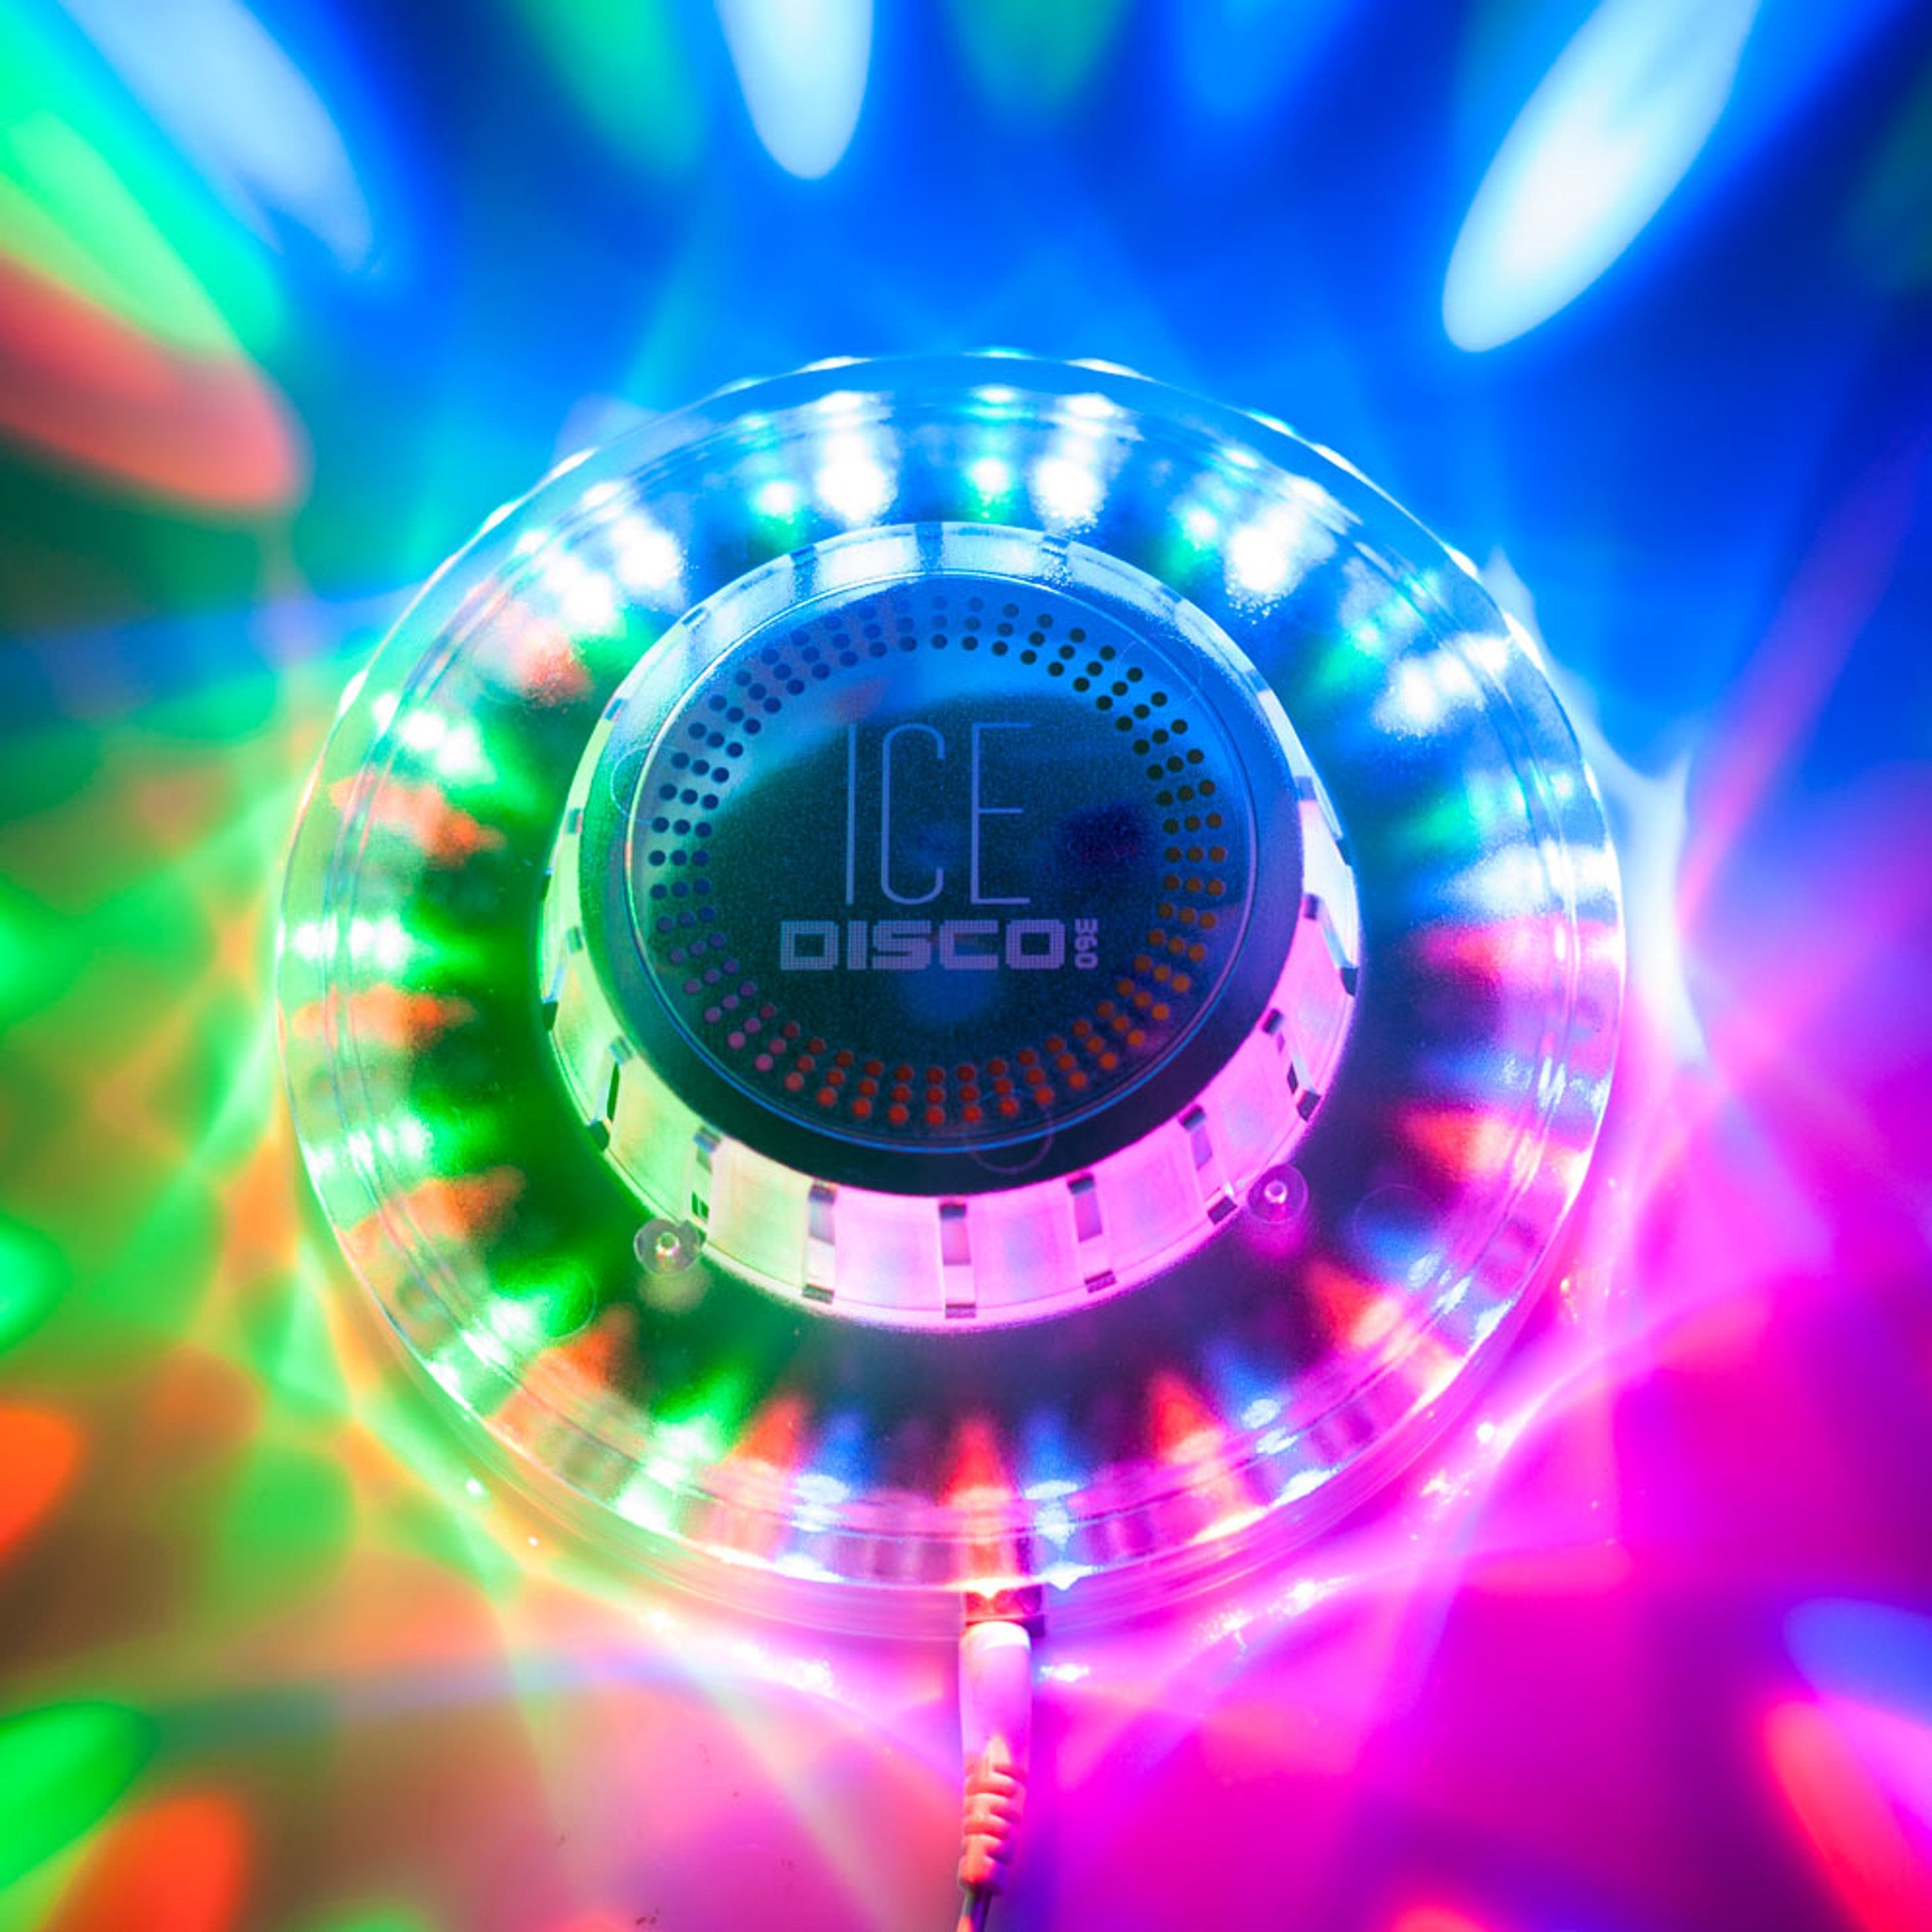 360 Disco Ice Light, Transform your party space into a dazzling display with the Disco Ice Light! Equipped with 48 vibrant LEDs in red, green, and blue, this compact light device offers a 360-degree explosion of color. Whether it's a birthday, a dance party, or a simple get-together, the Disco Ice Light provides the perfect atmosphere. 360 Disco Ice Light Features: Sound Responsive: Dance the night away as the LED lights move to the rhythm of your music. 360° Light Projection: Casts vibrant beams of red, gr